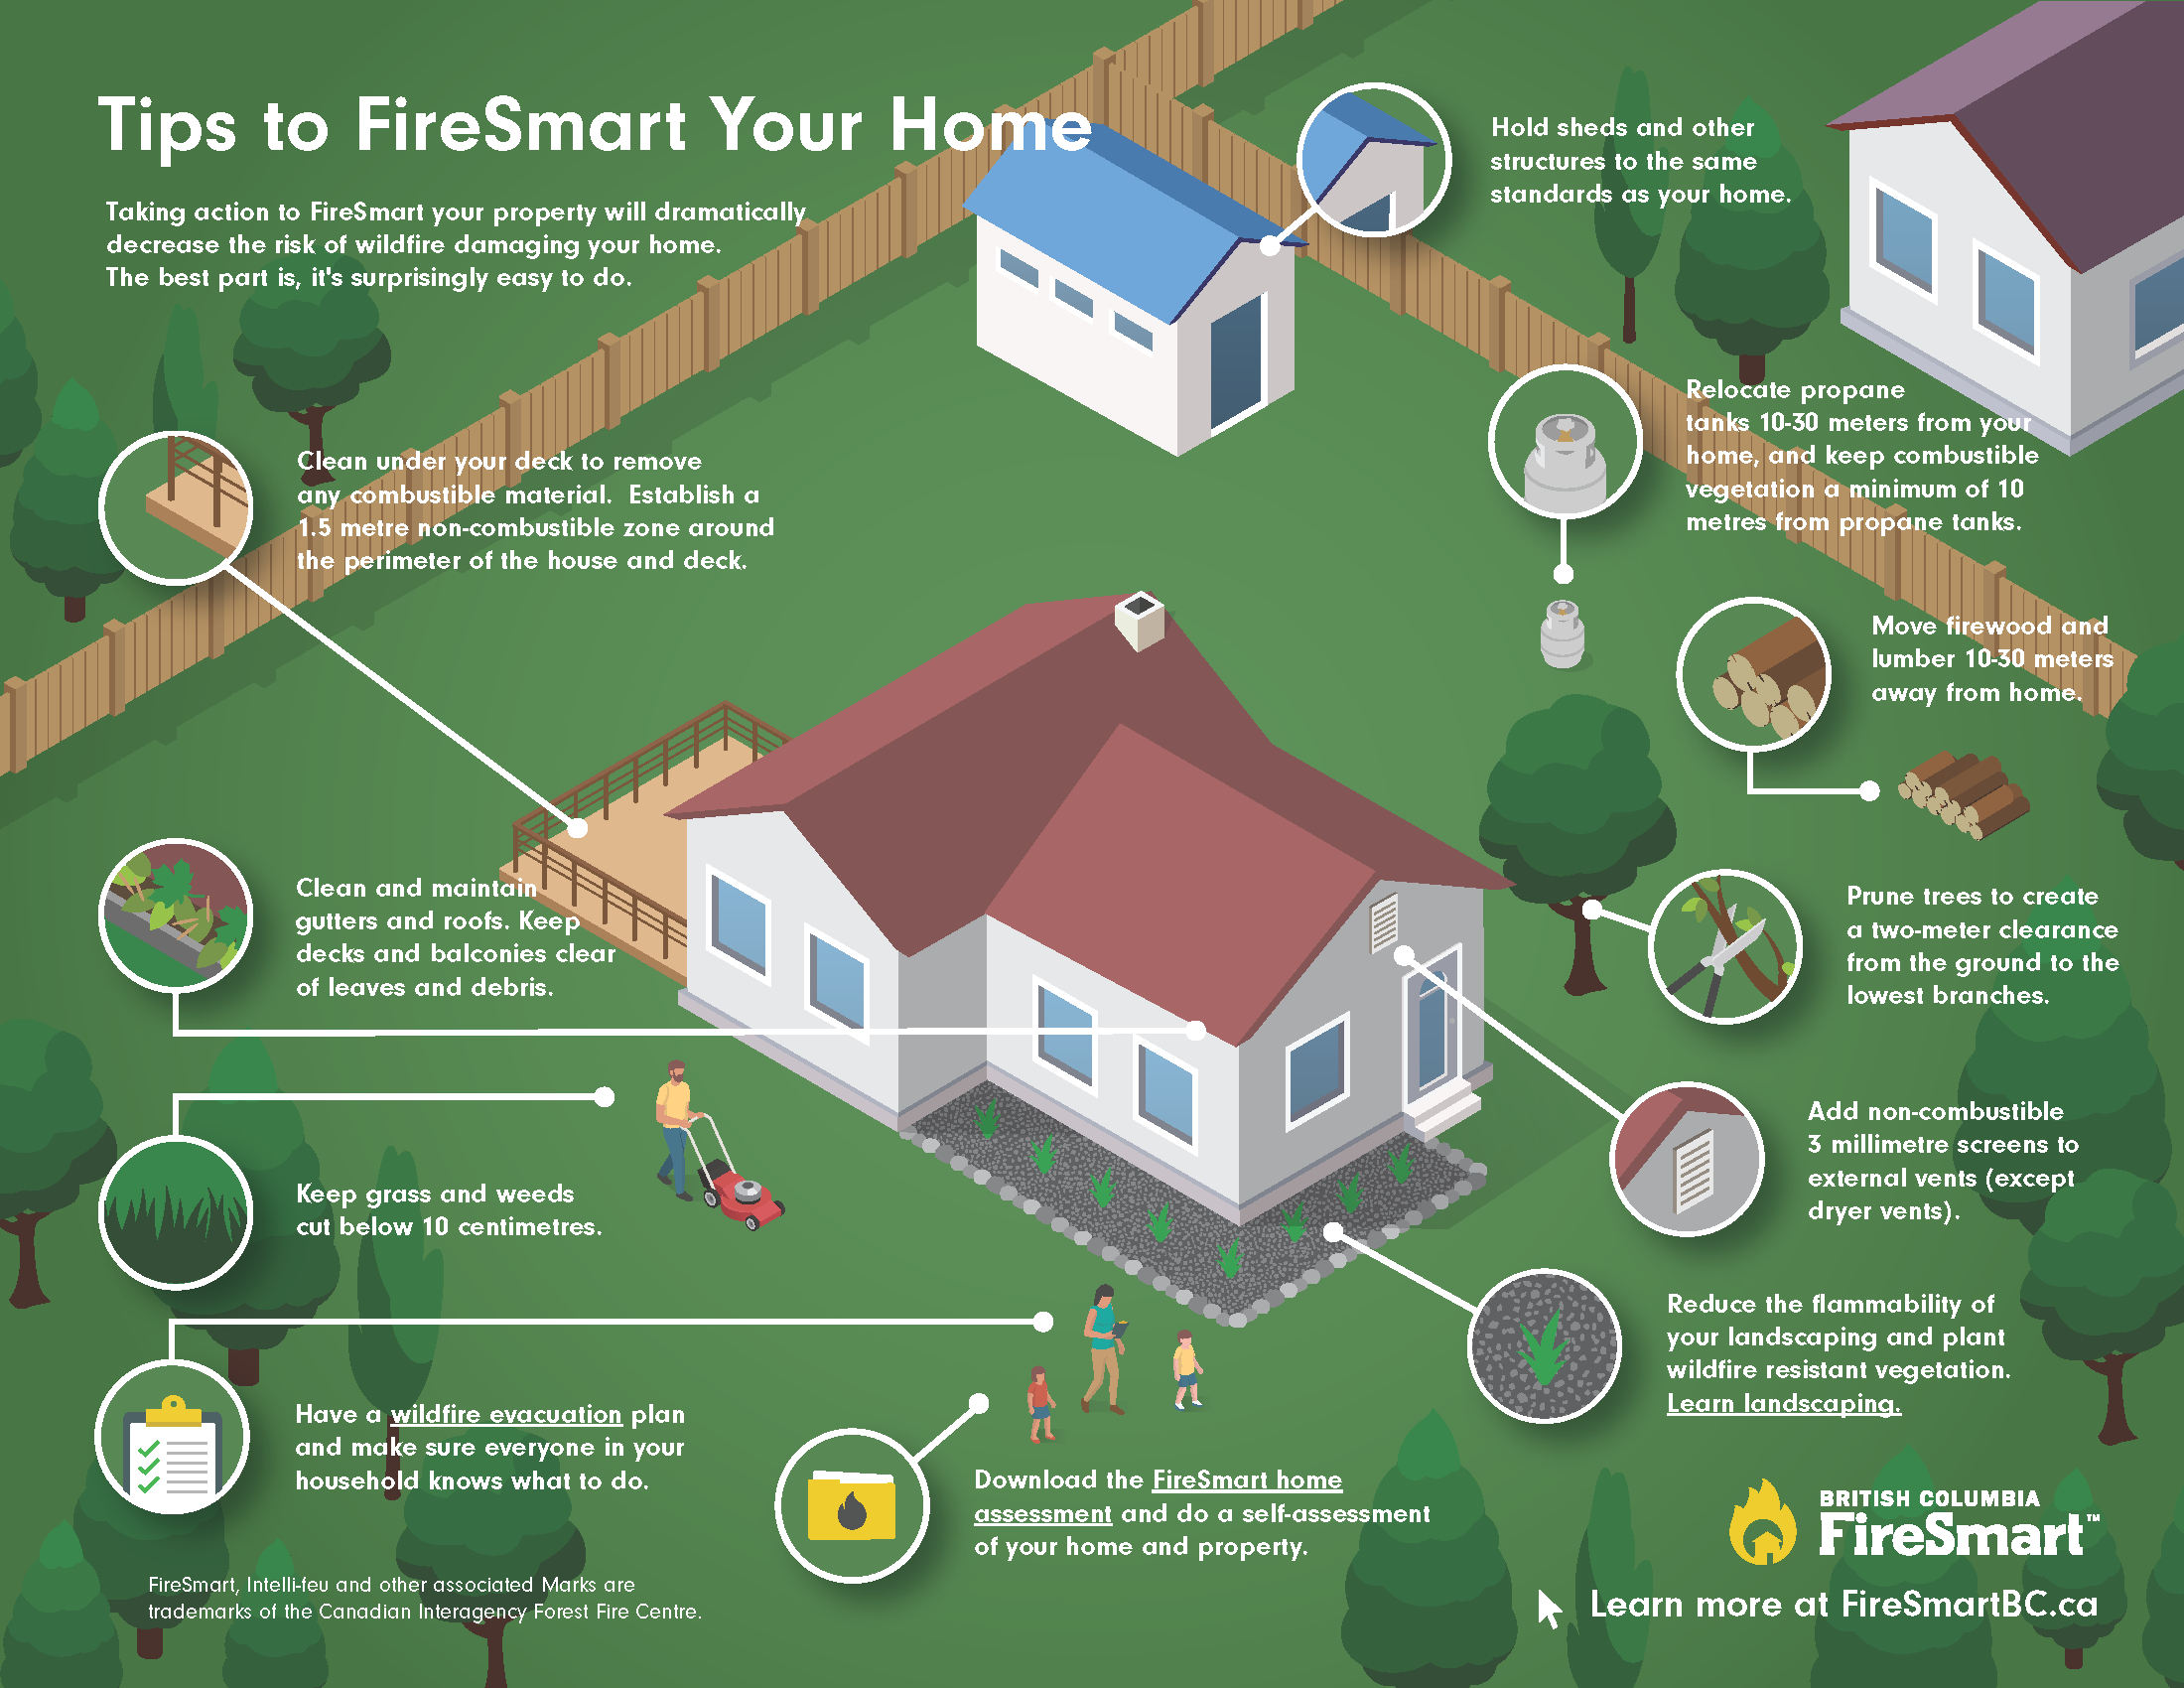 Tips to FireSmart your Home